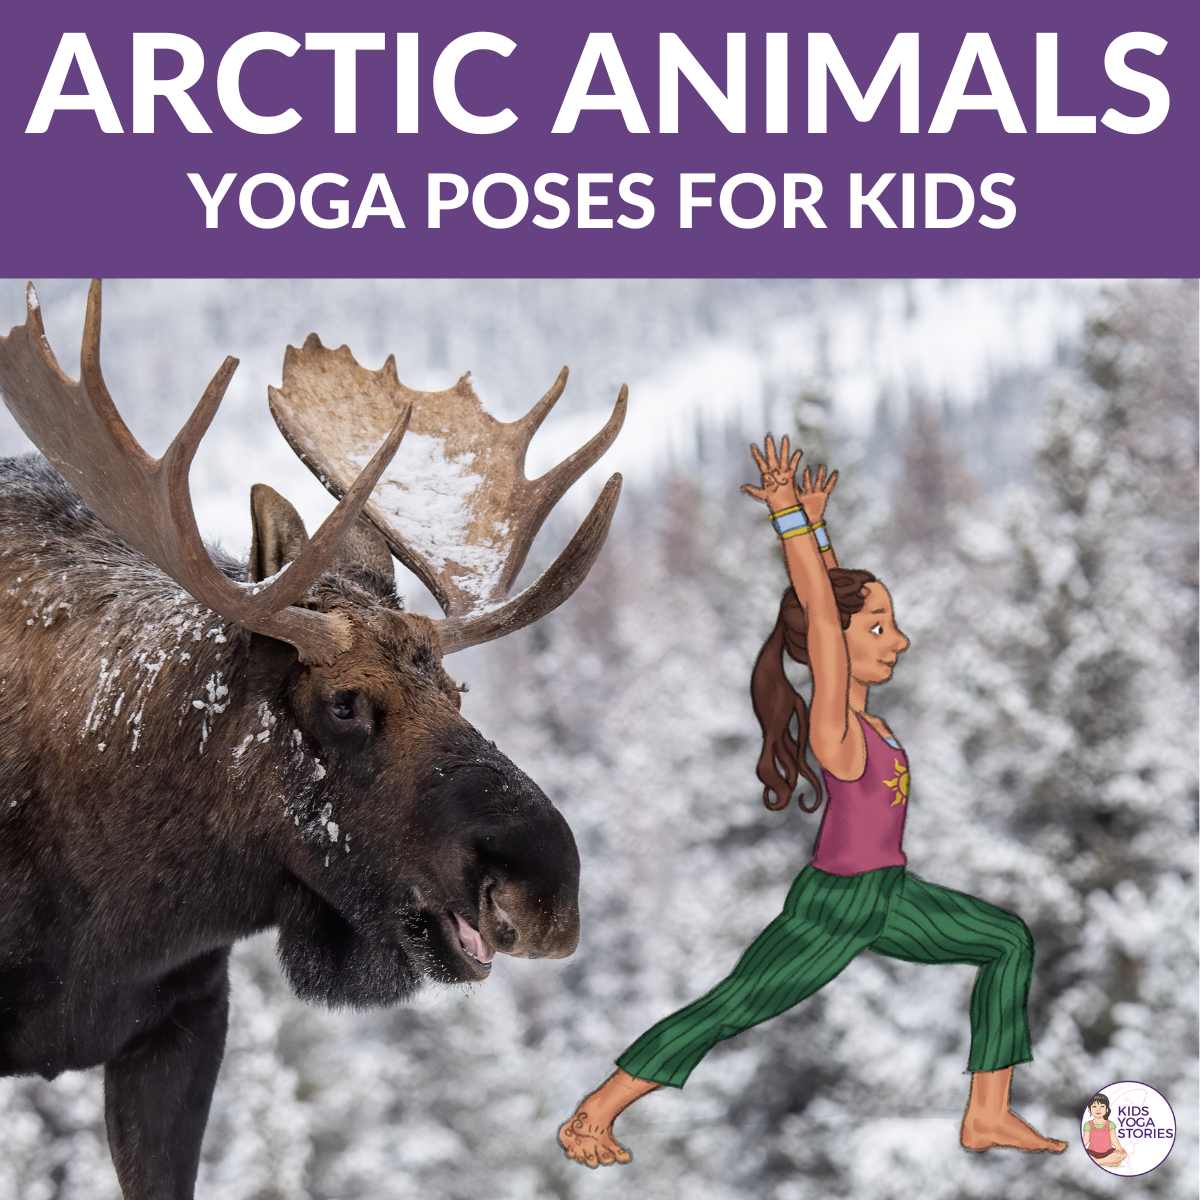 Arctic Animals Books and Yoga Poses for Kids | Kids Yoga Stories